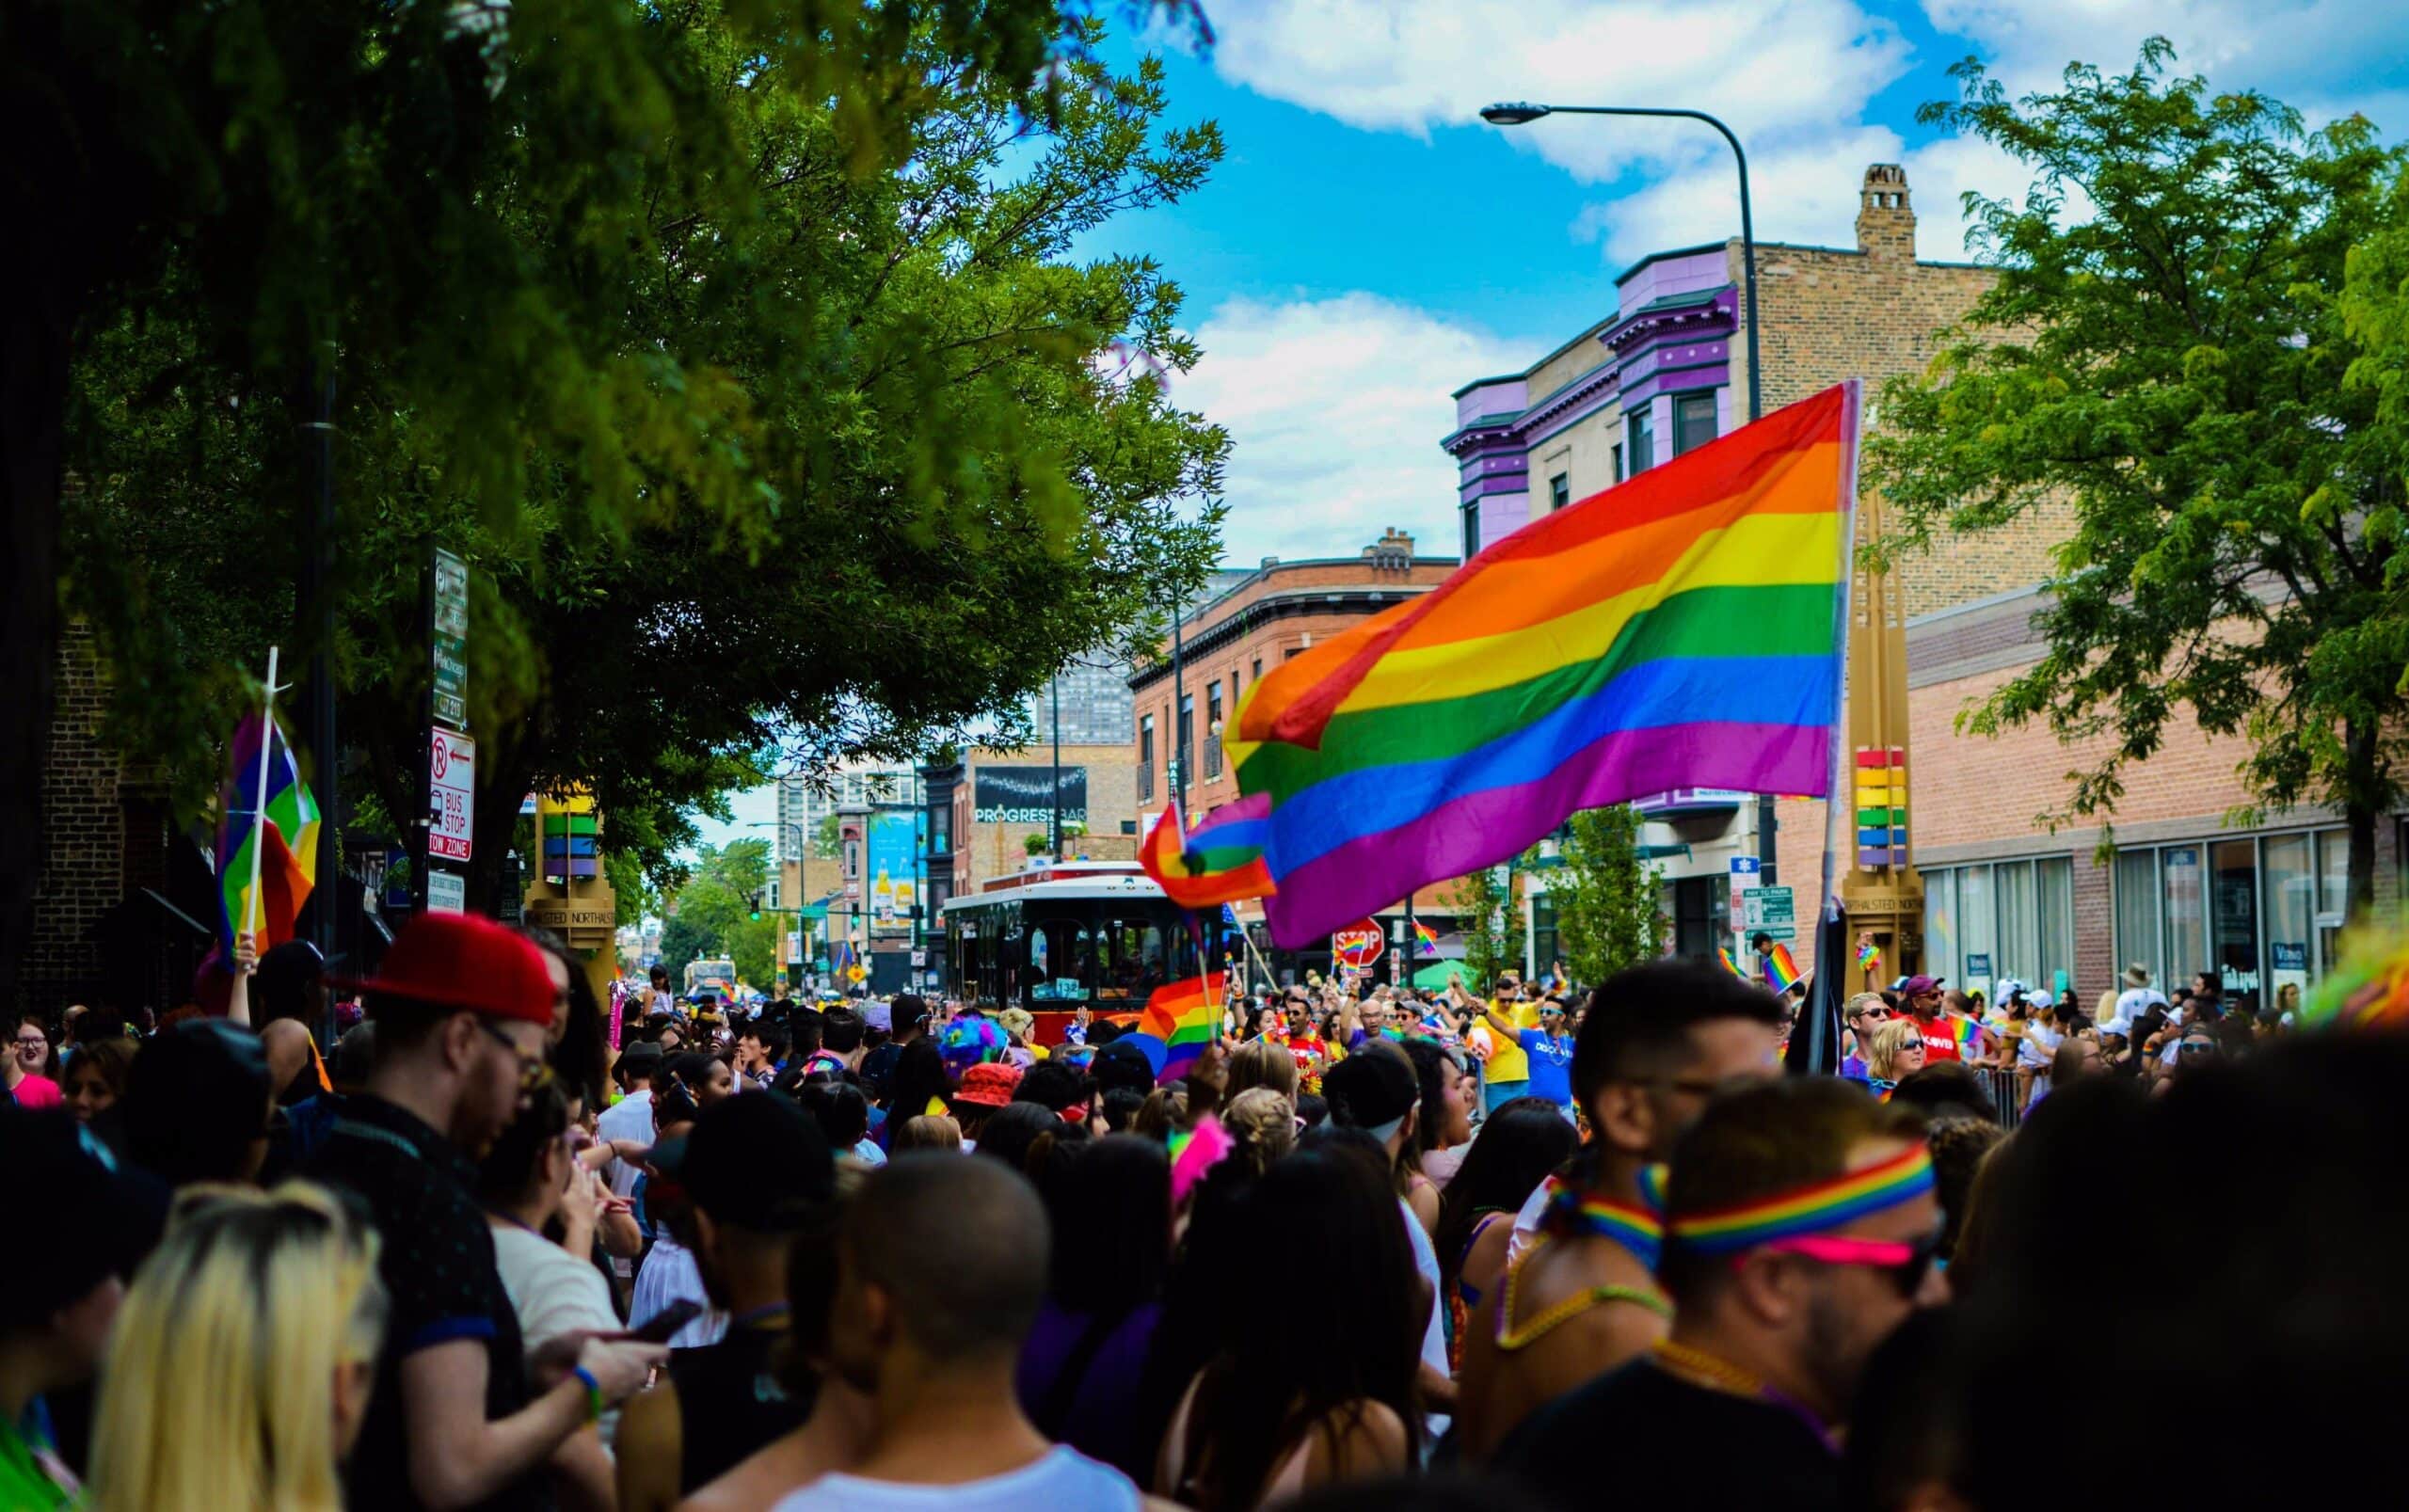 Addiction Treatment for the LGBTQ+ community. This photo is of the LGBTQAI+ community celebrating pride.